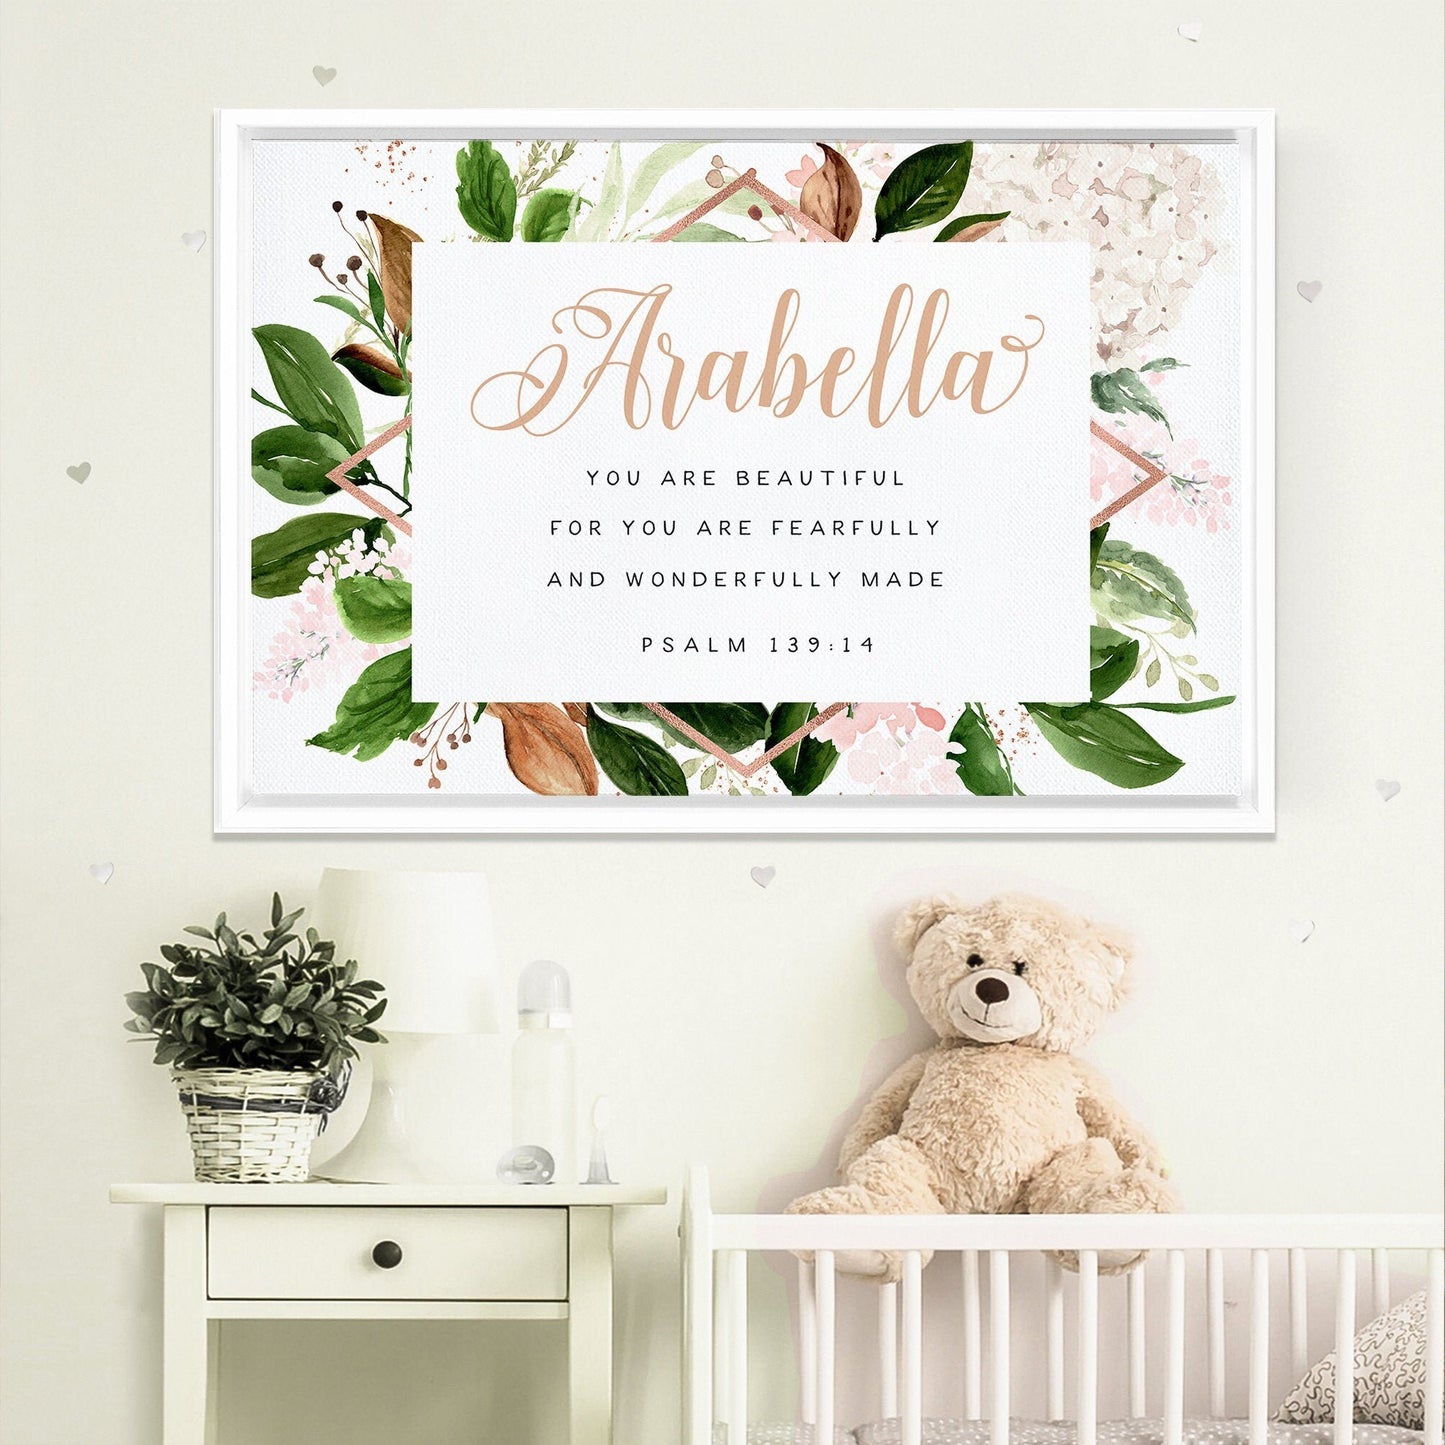 You are Fearfully and Wonderfully Made | Nursery Personalized Christian Wall Art | Scripture Wall Art Sign | Psalm 139:14 | Children's Decor - Forever Written